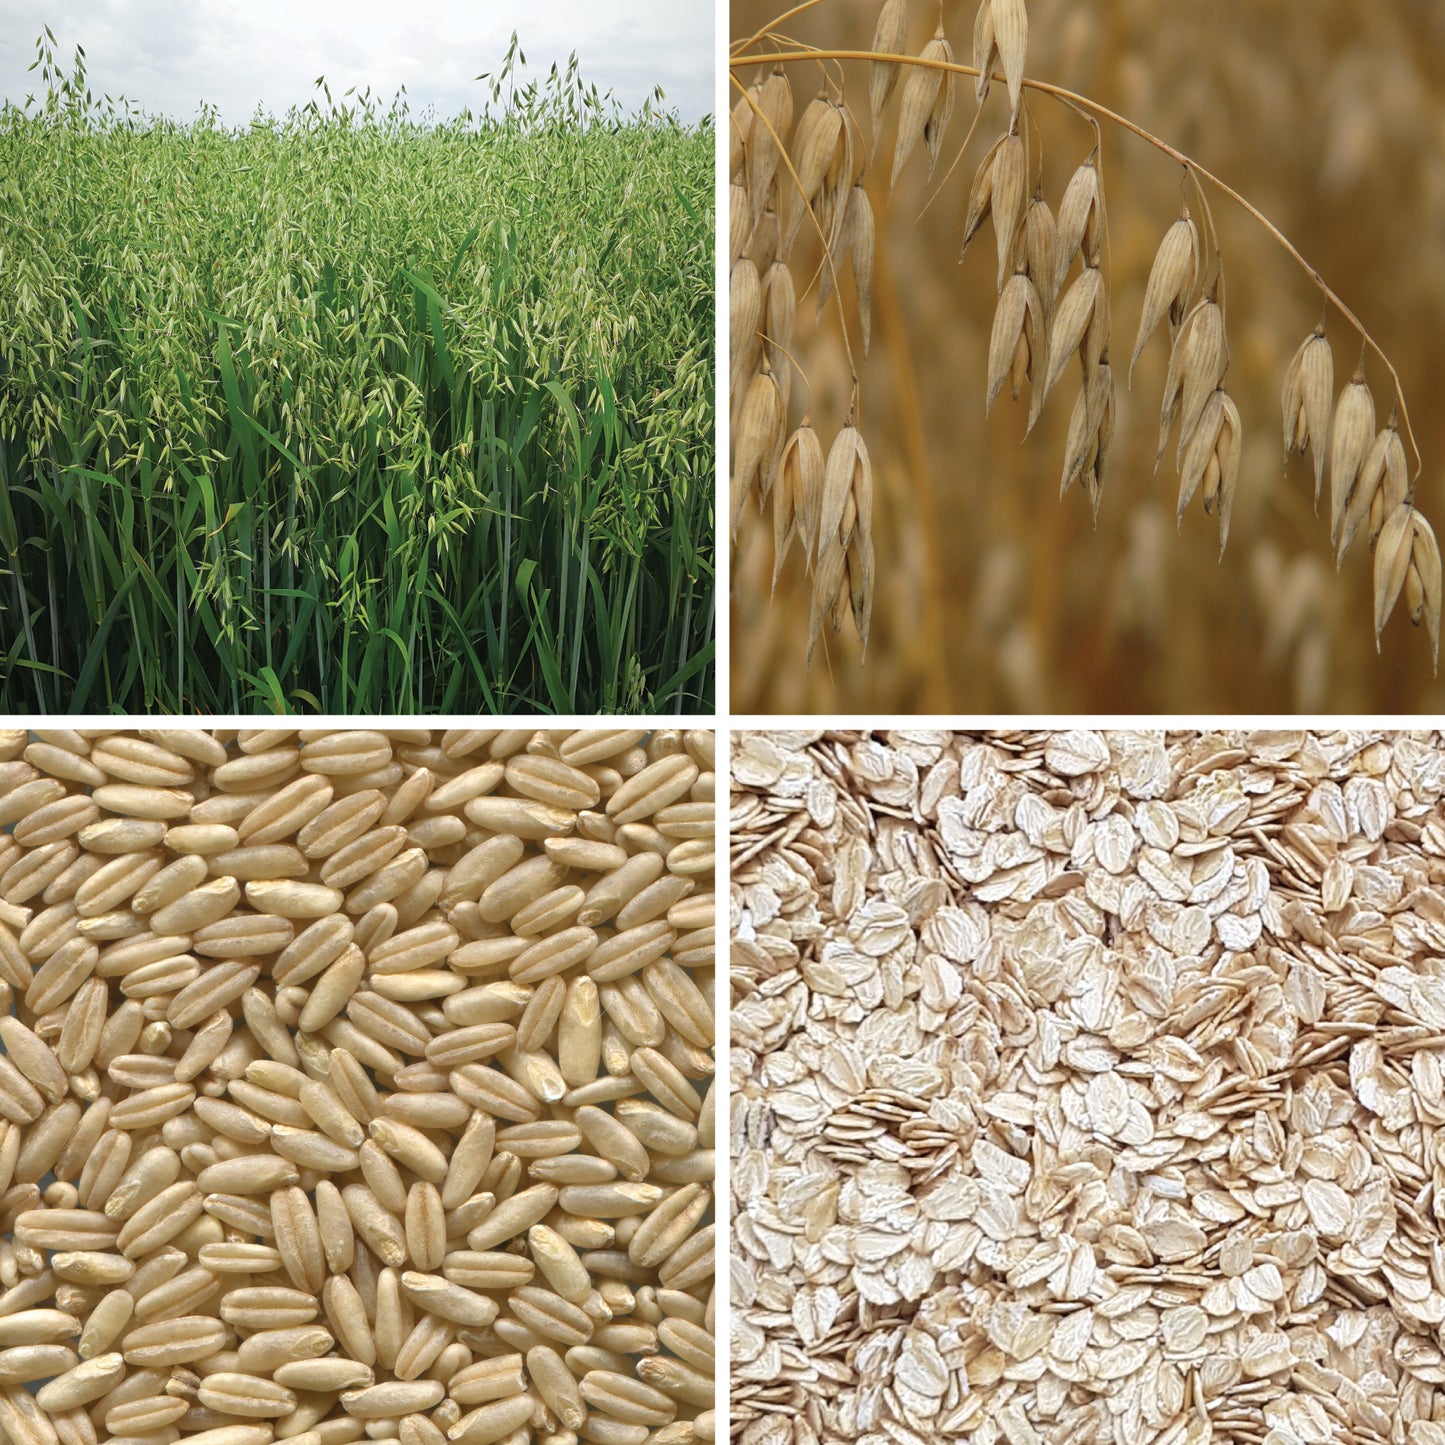 BY NATURE Oats, Rolled - Certified Organic at Source